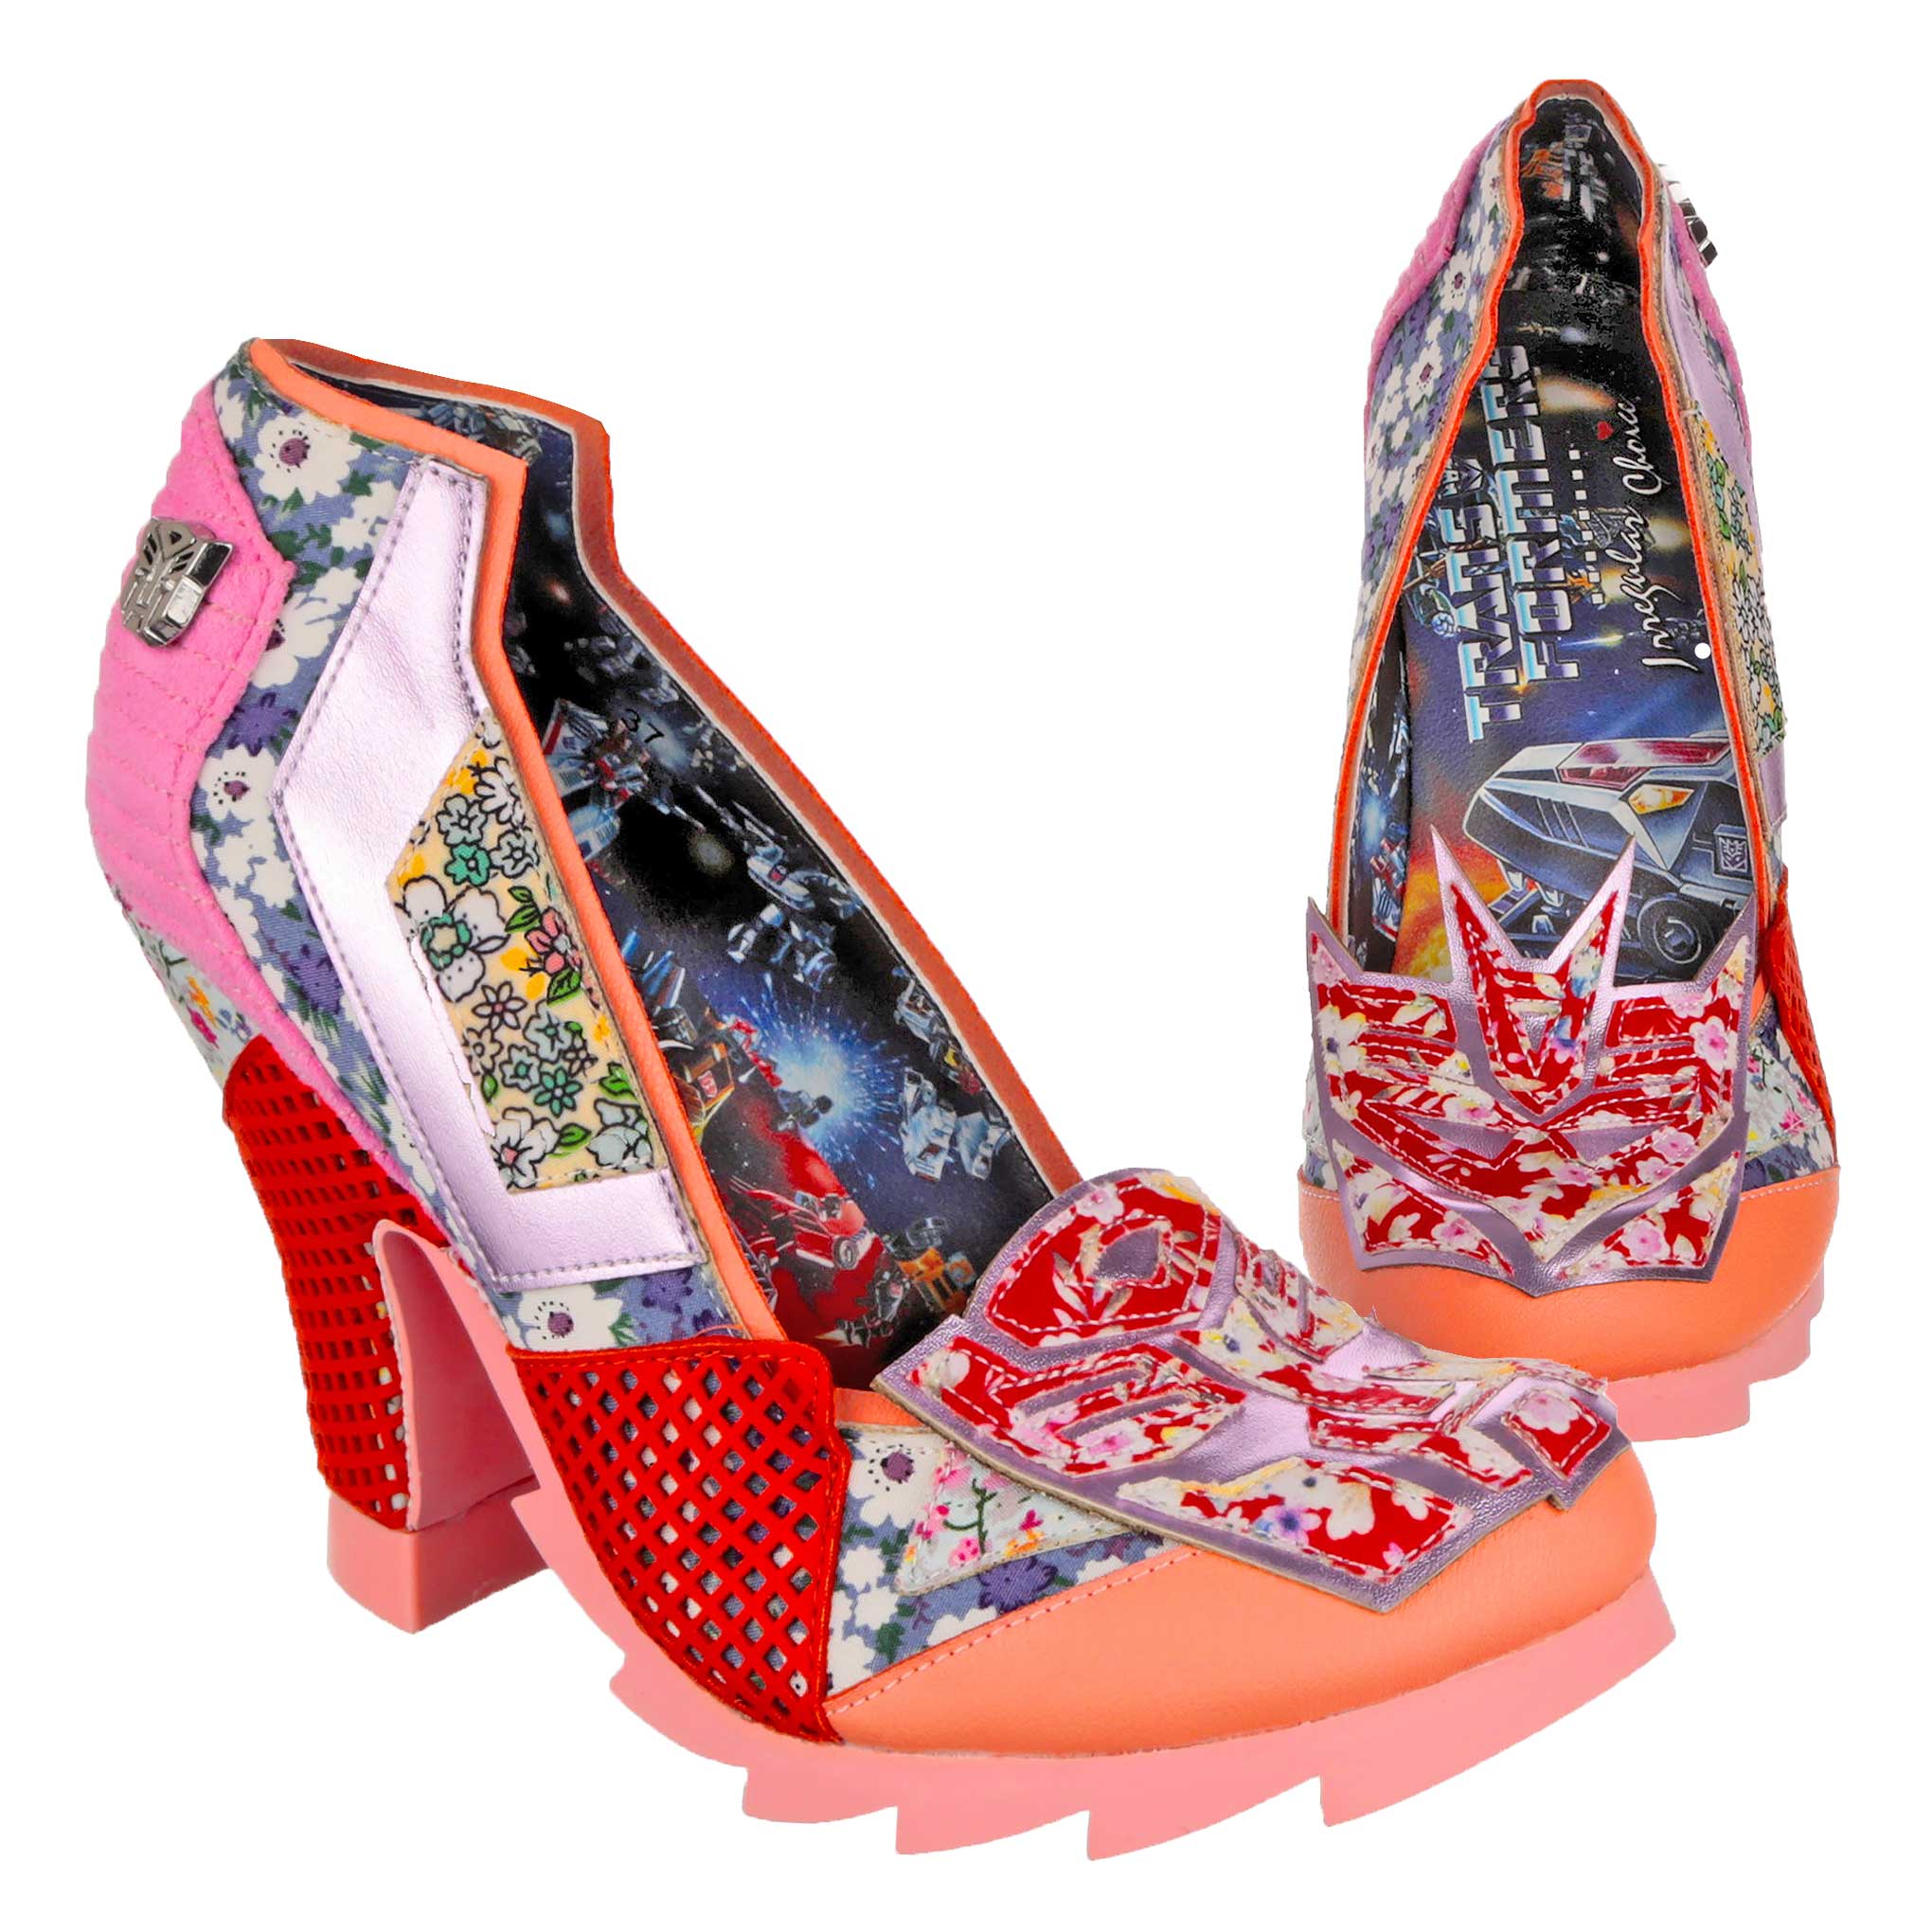 Transformers themed high heel shoes with multicolour vintage floral fabric covering the shoe. Pink, orange and red trims make up this pretty shoe with a pale pink chunky sole and high heel.  Autobot and Decepticon logos are embroidered onto the toe of the shoe. A Transformers logo and Transformers battle scene is depicted on the lining of the shoe.